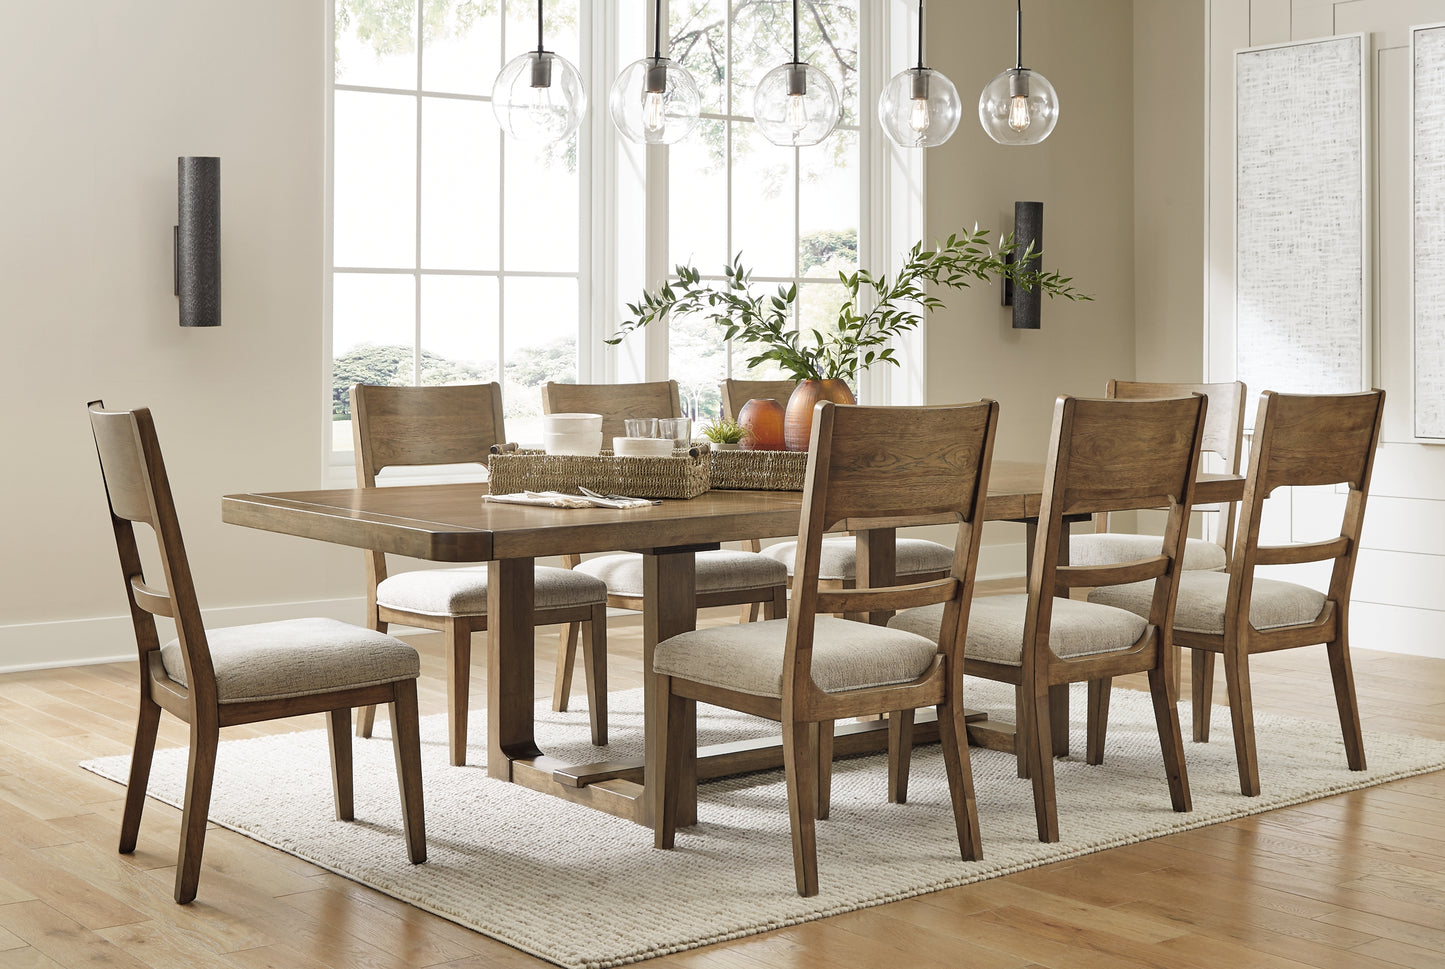 Cabalynn Dining Table and 8 Chairs Wilson Furniture (OH)  in Bridgeport, Ohio. Serving Bridgeport, Yorkville, Bellaire, & Avondale